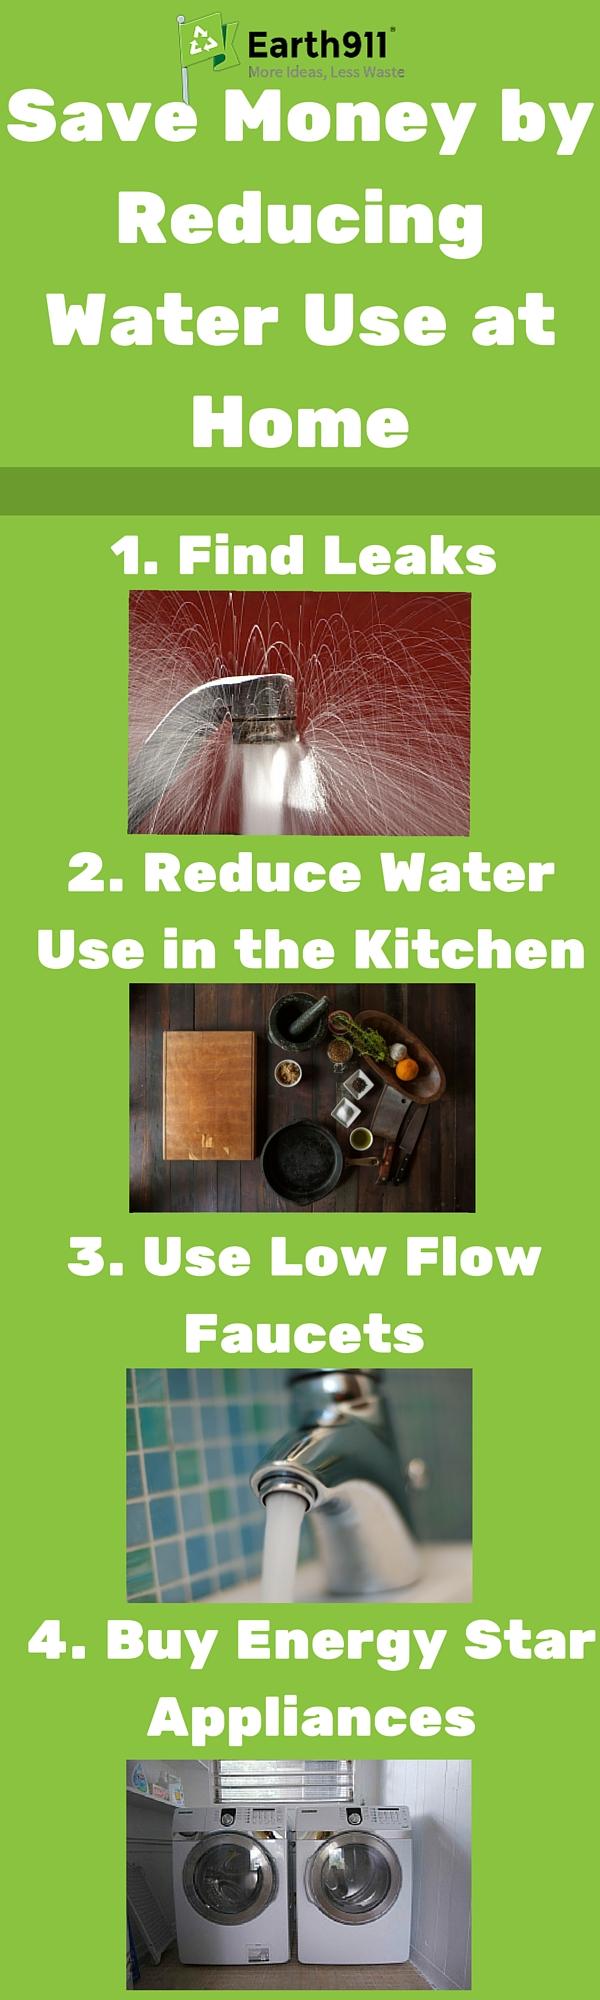 Reduce Water Use at Home With These 4 Simple Steps 